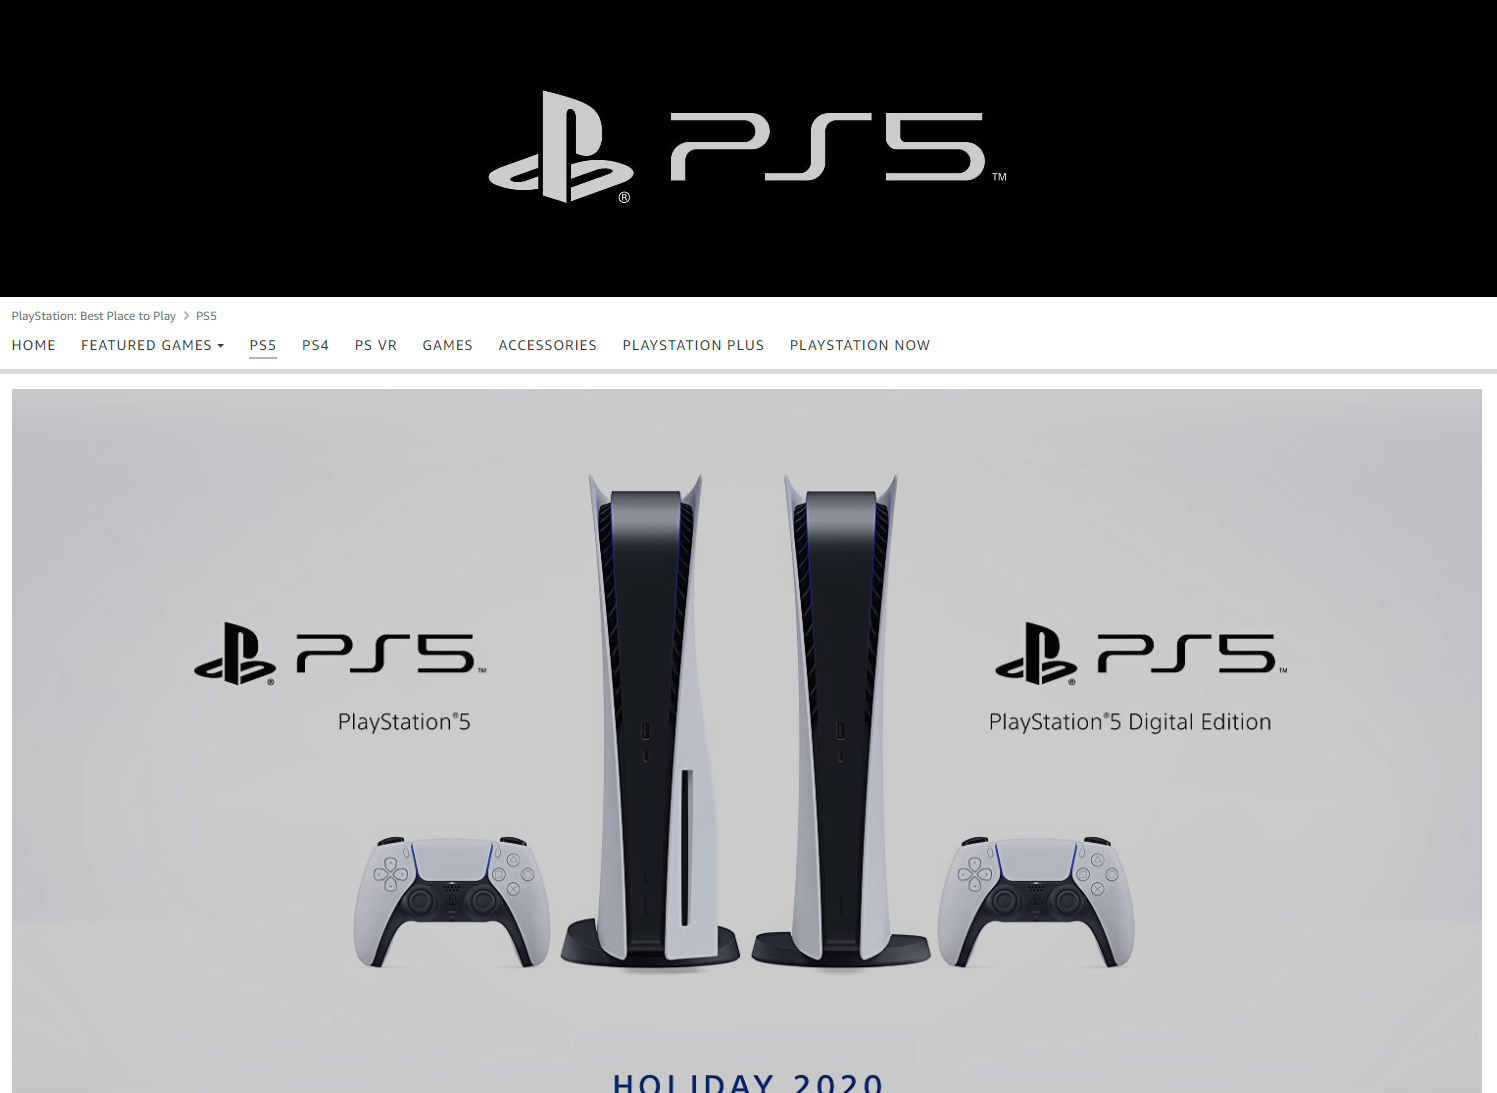 playstation 5 pre order available now